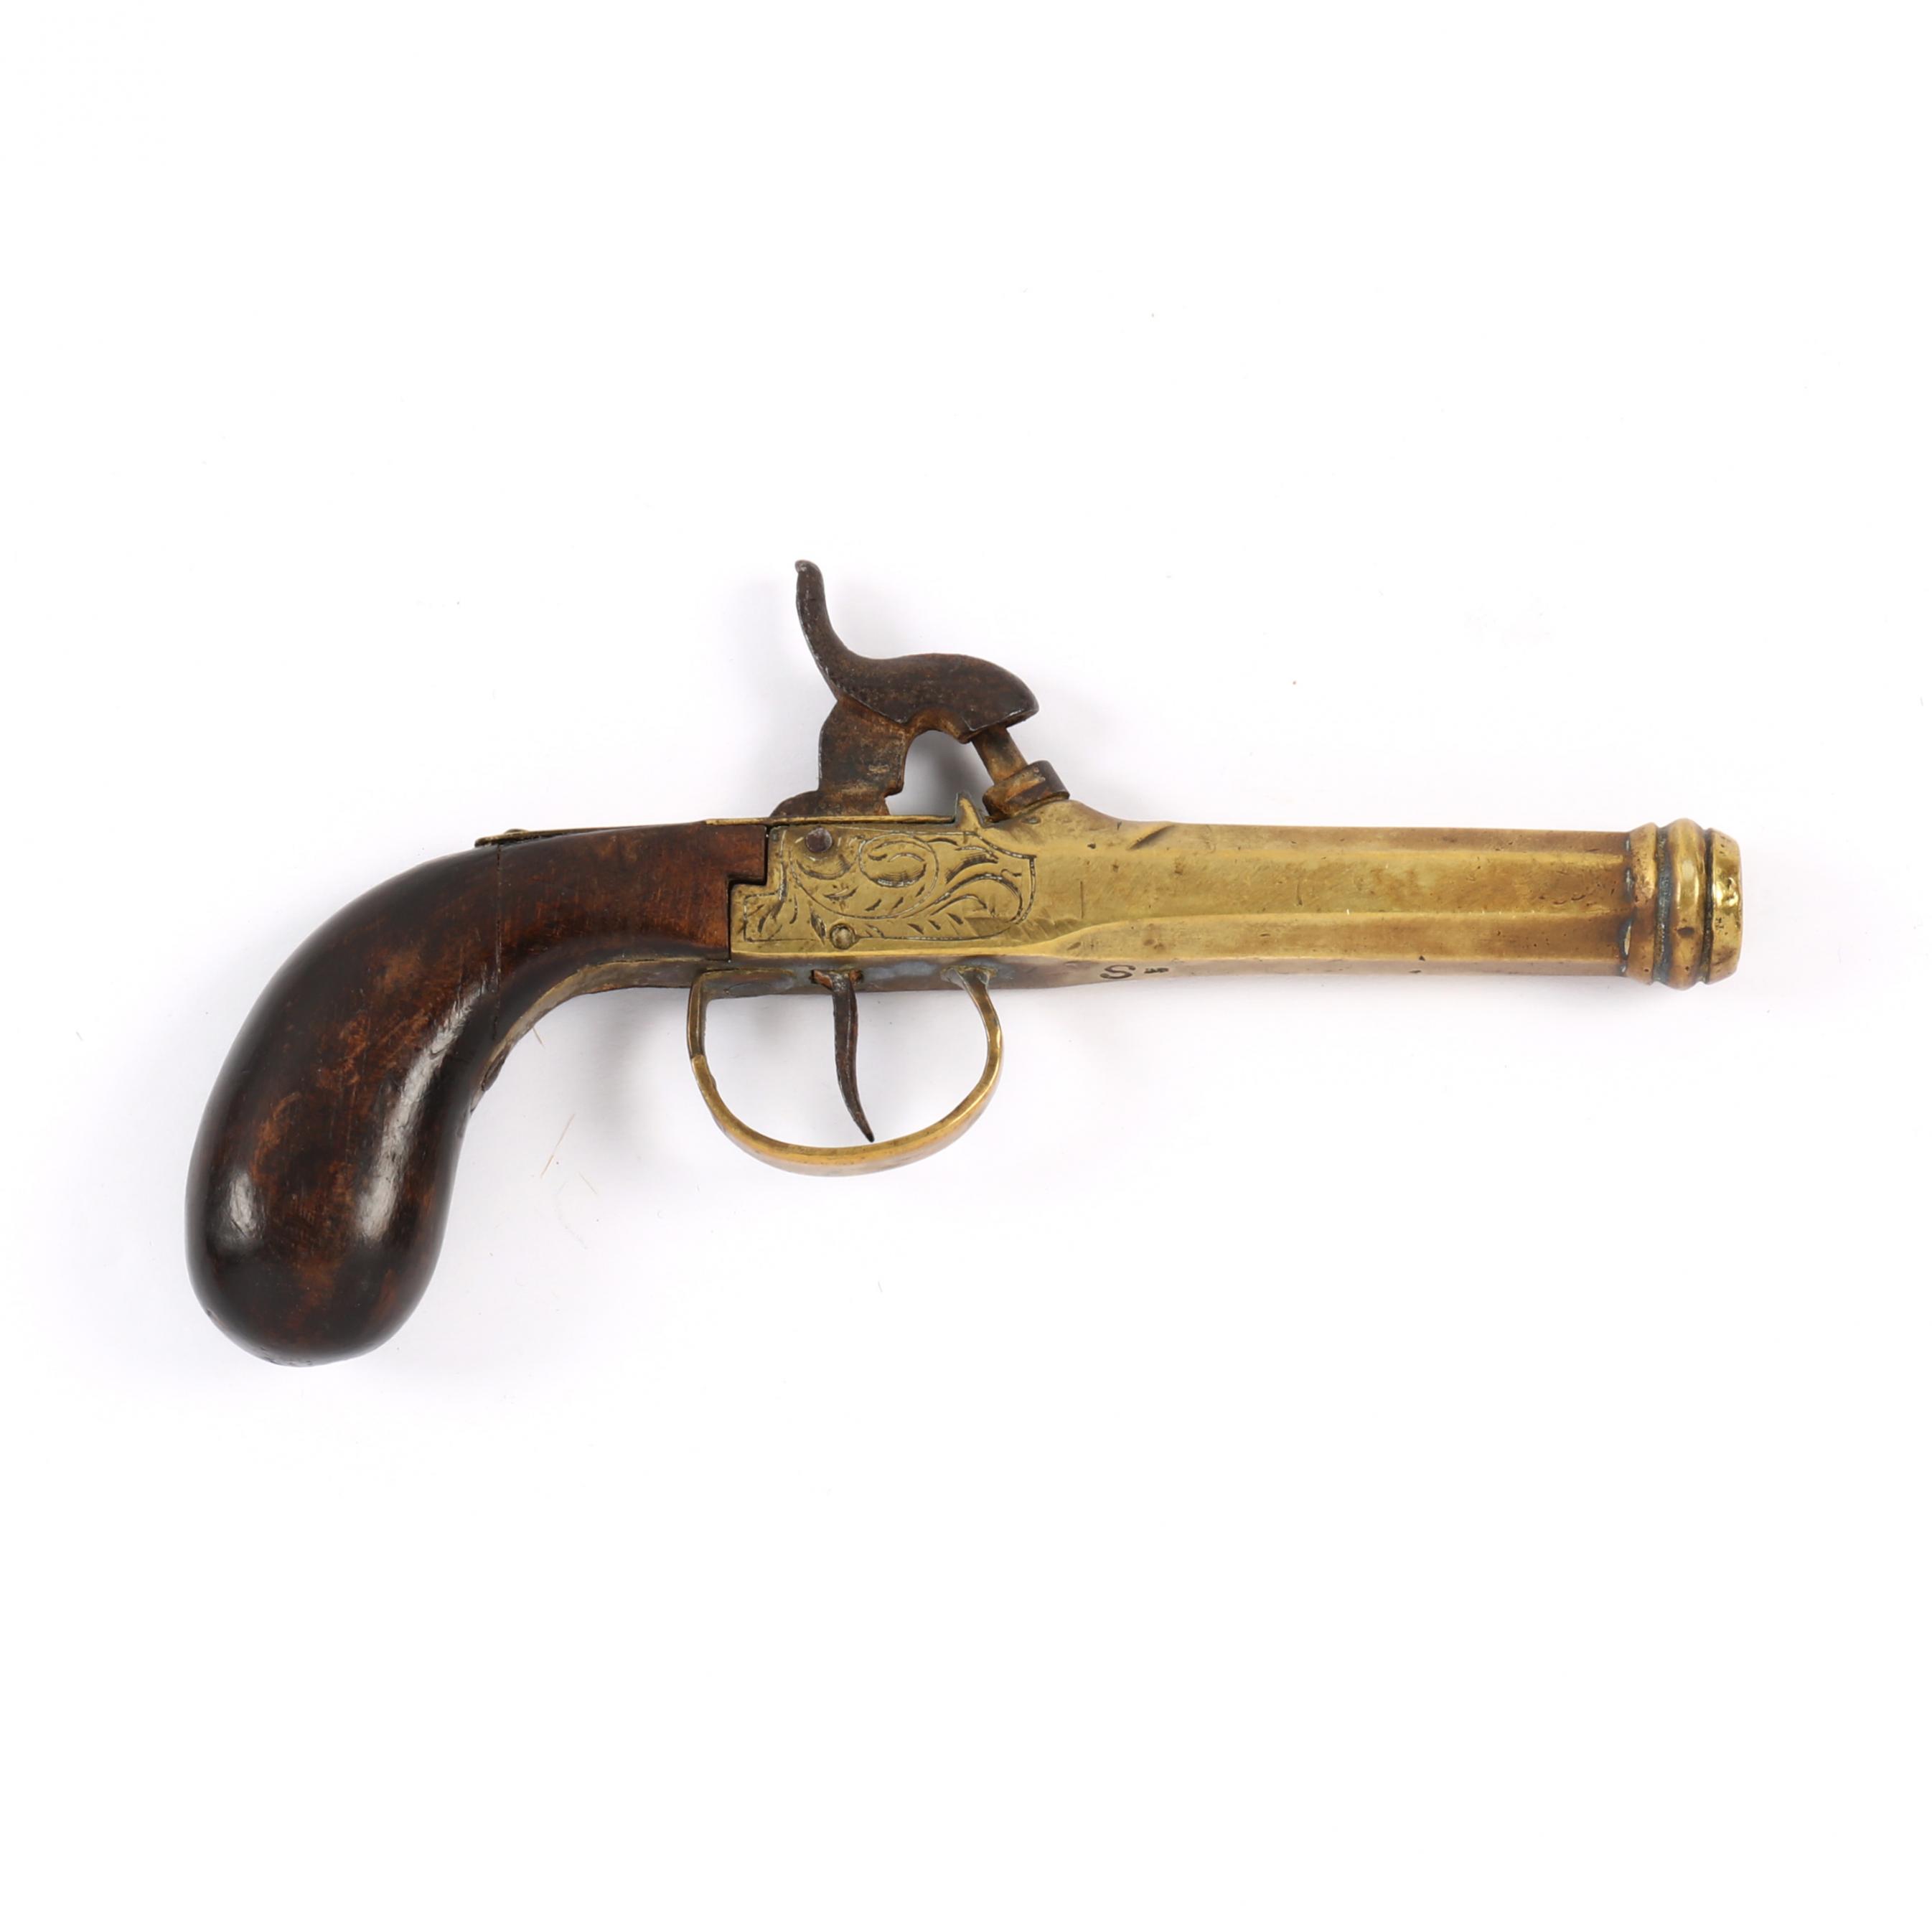 Belgian Percussion Boot Pistol With Octagonal Cannon-Style Brass Barrel  (Lot 2443 - Presidents' Week Estate AuctionFeb 23, 2023, 9:00am)